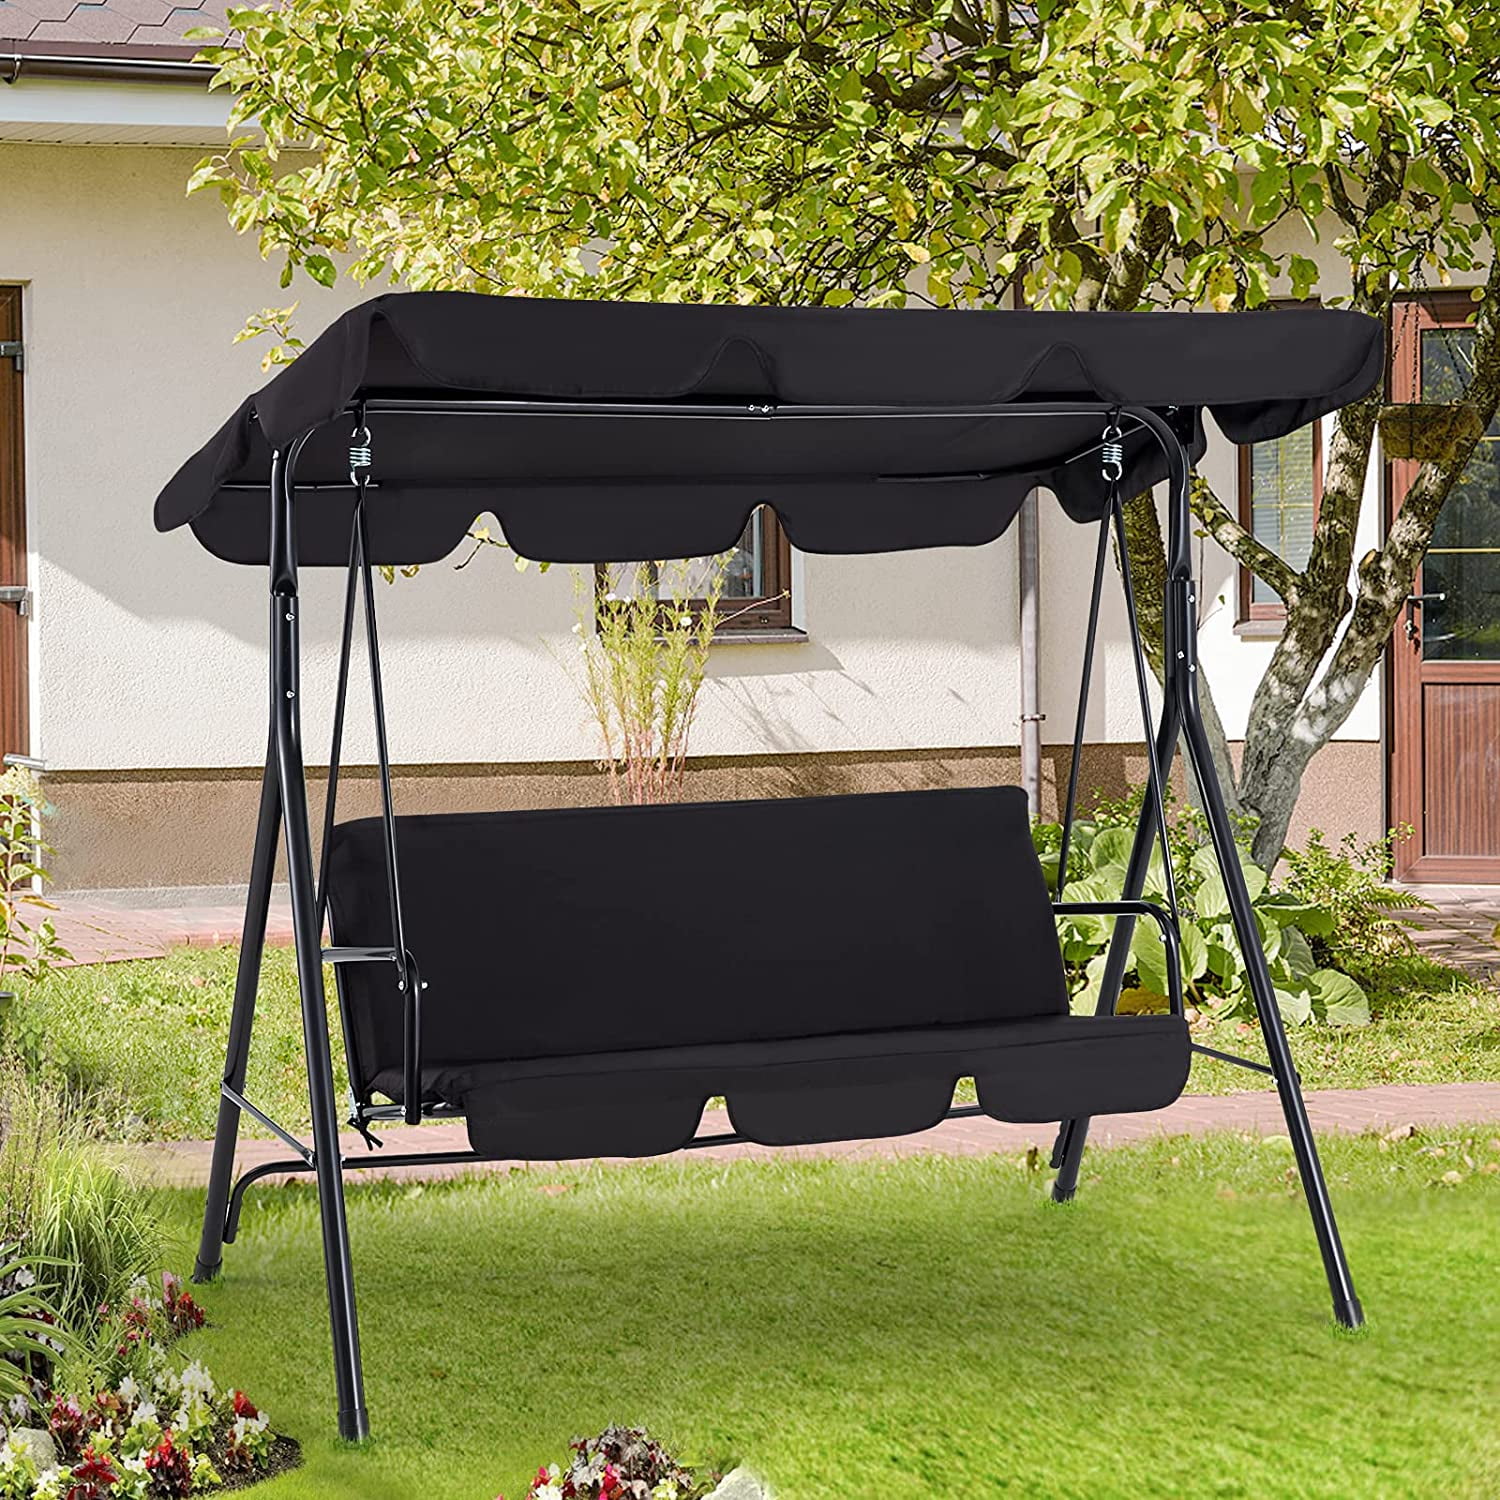 Details about   Metal Hammock Stand Frame Double Person Large Garden Camping Outdoor Patio Swing 